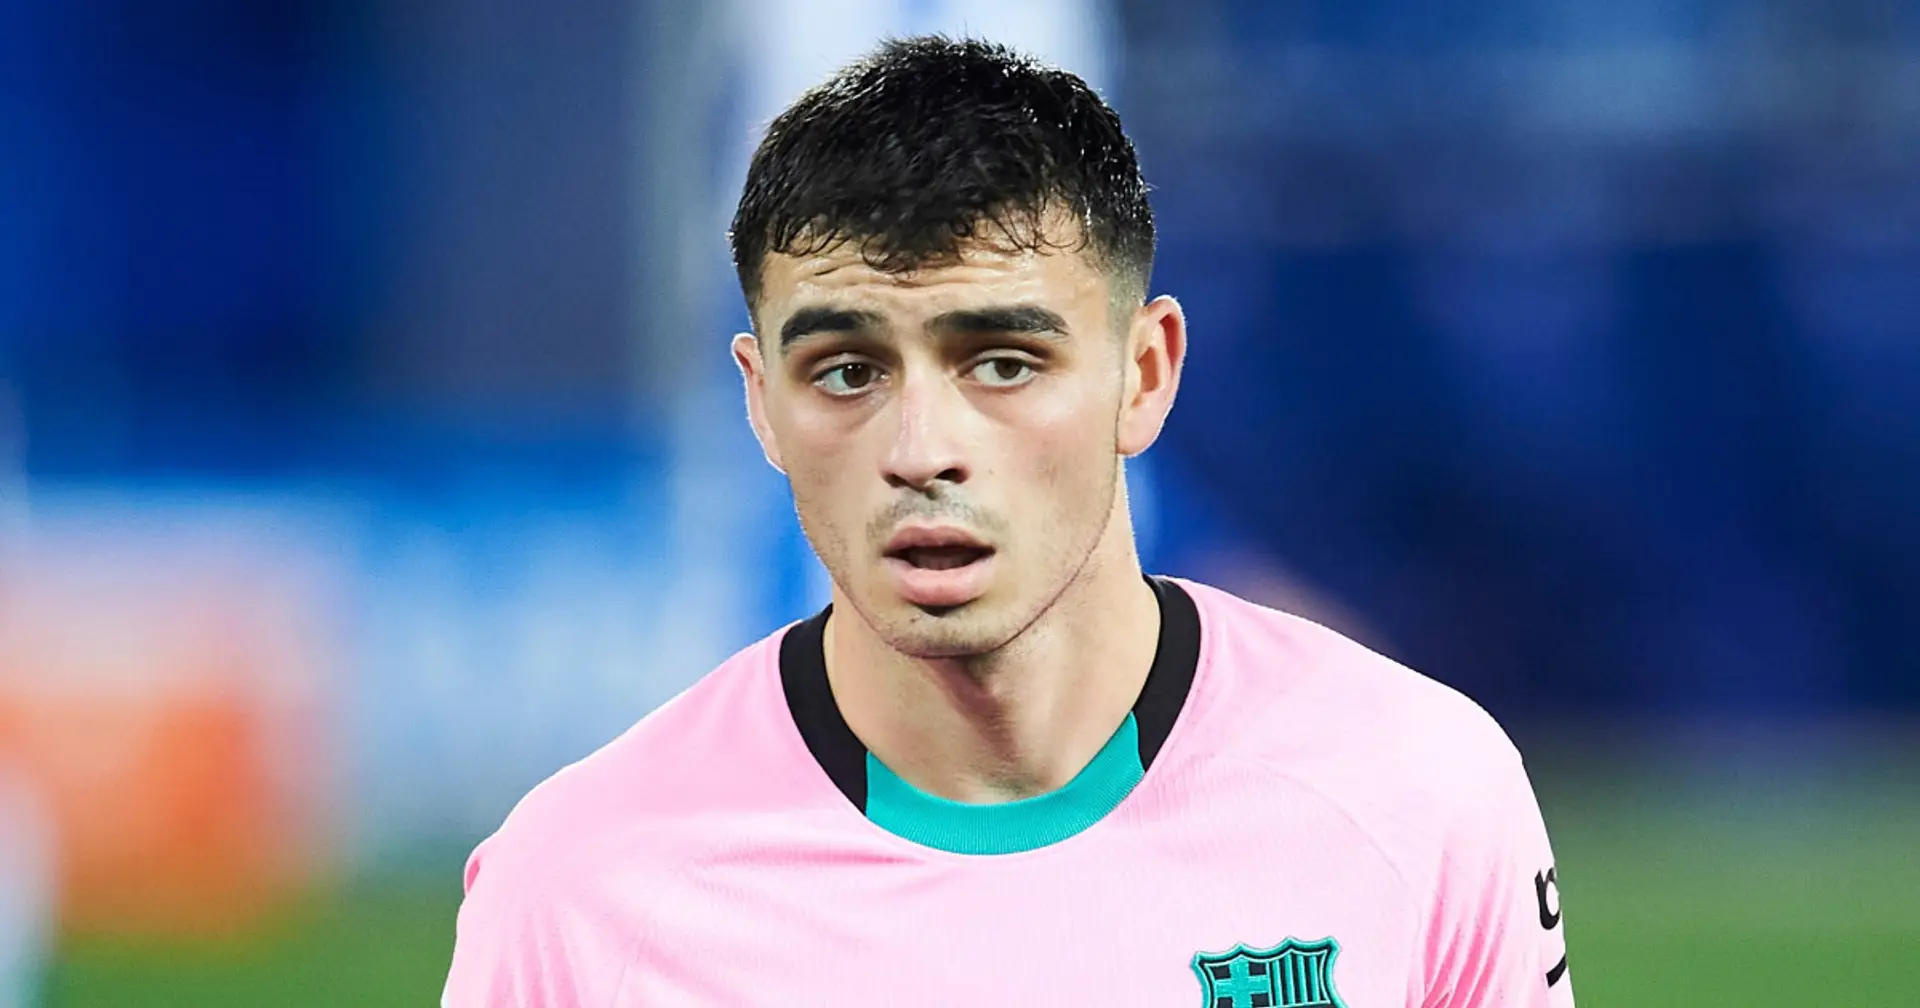 Liverpool approach Pedri's representatives, Barca set to offer youngster new deal to scare them away (reliability: 3 stars)